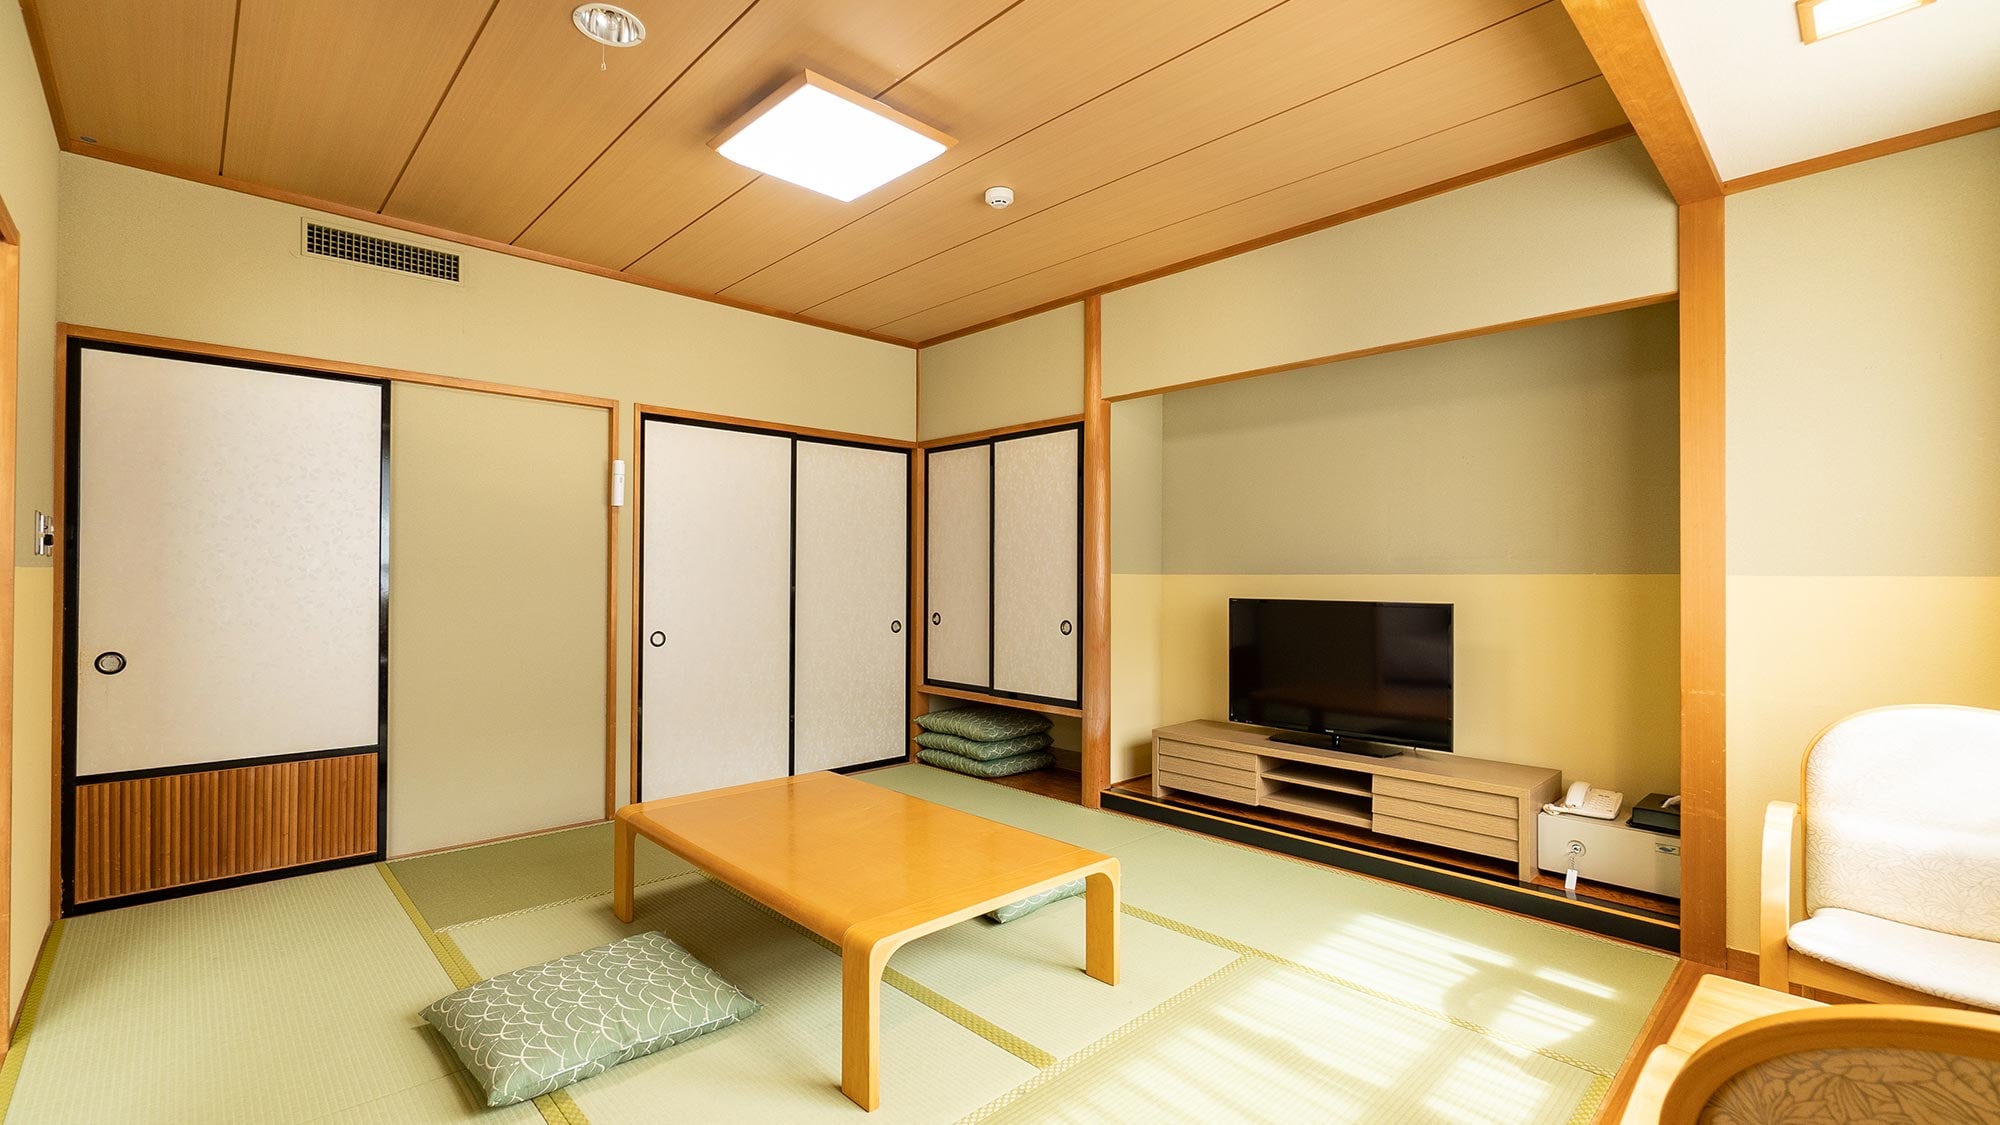 Annex-Japanese and Western room twin + 8 tatami mats / non-smoking / capacity ~ 5 people